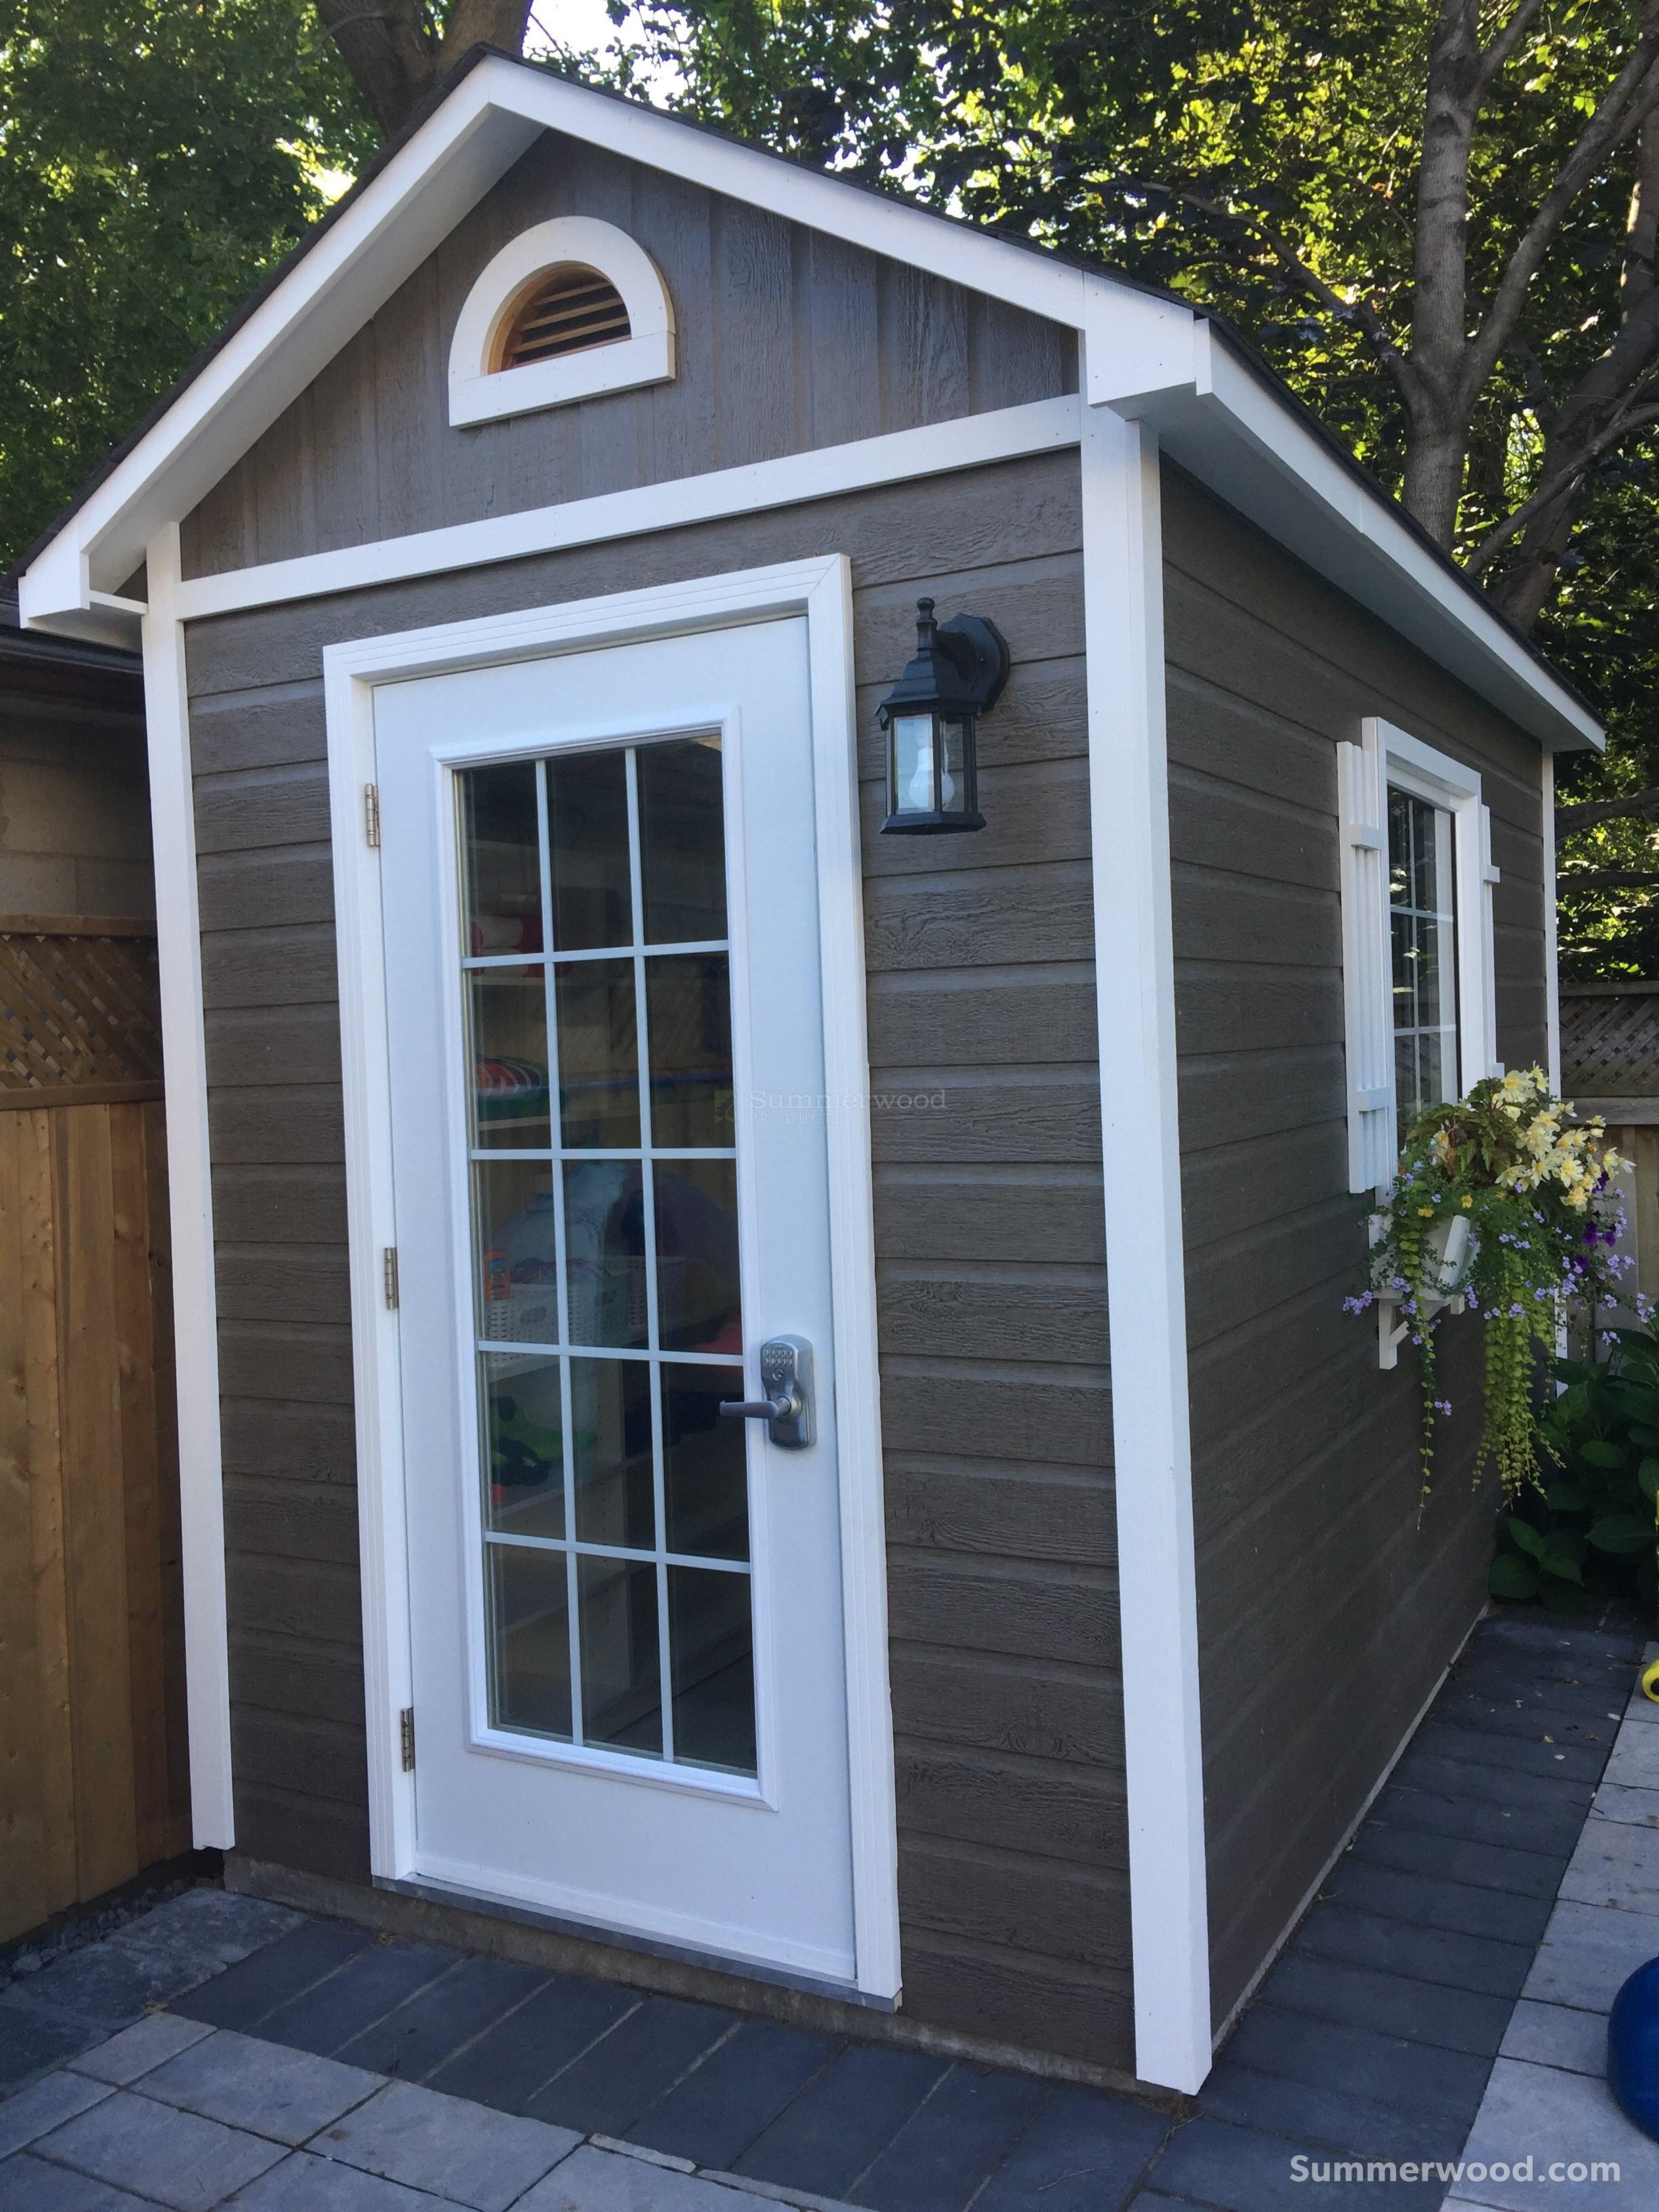 Canexel Palmerston pool cabana 6 x 12 with bunkie window in Toronto, ON. ID number 217712-2